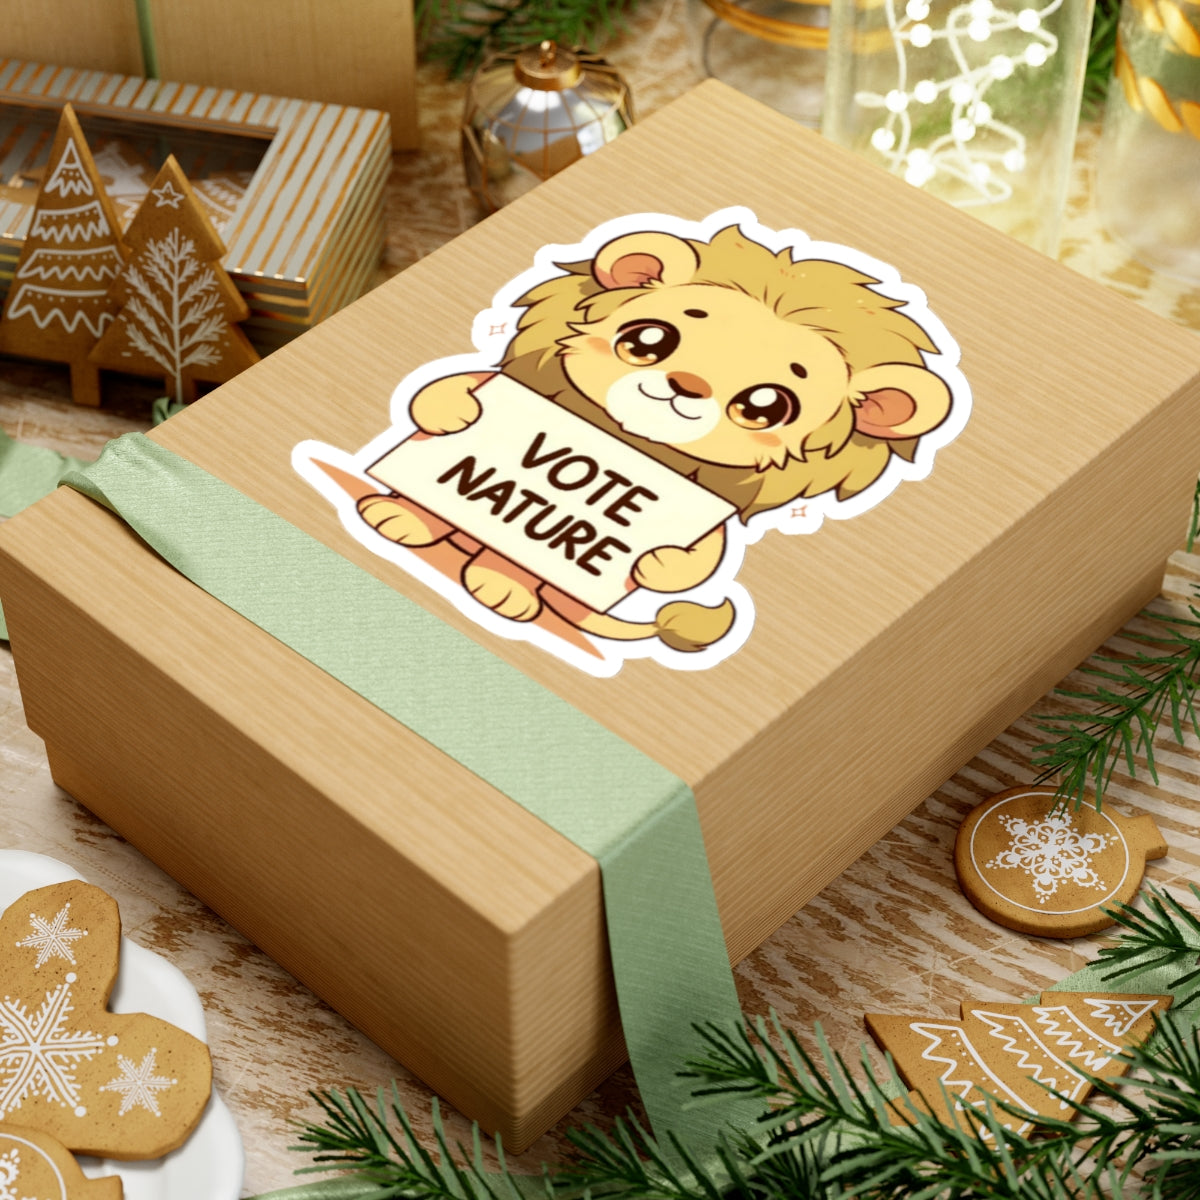 Inspirational Cute Lion Statement vinyl Sticker: Vote Nature! laptop, kindle, phone, ipad, instrument case, notebook, mood board, or wall